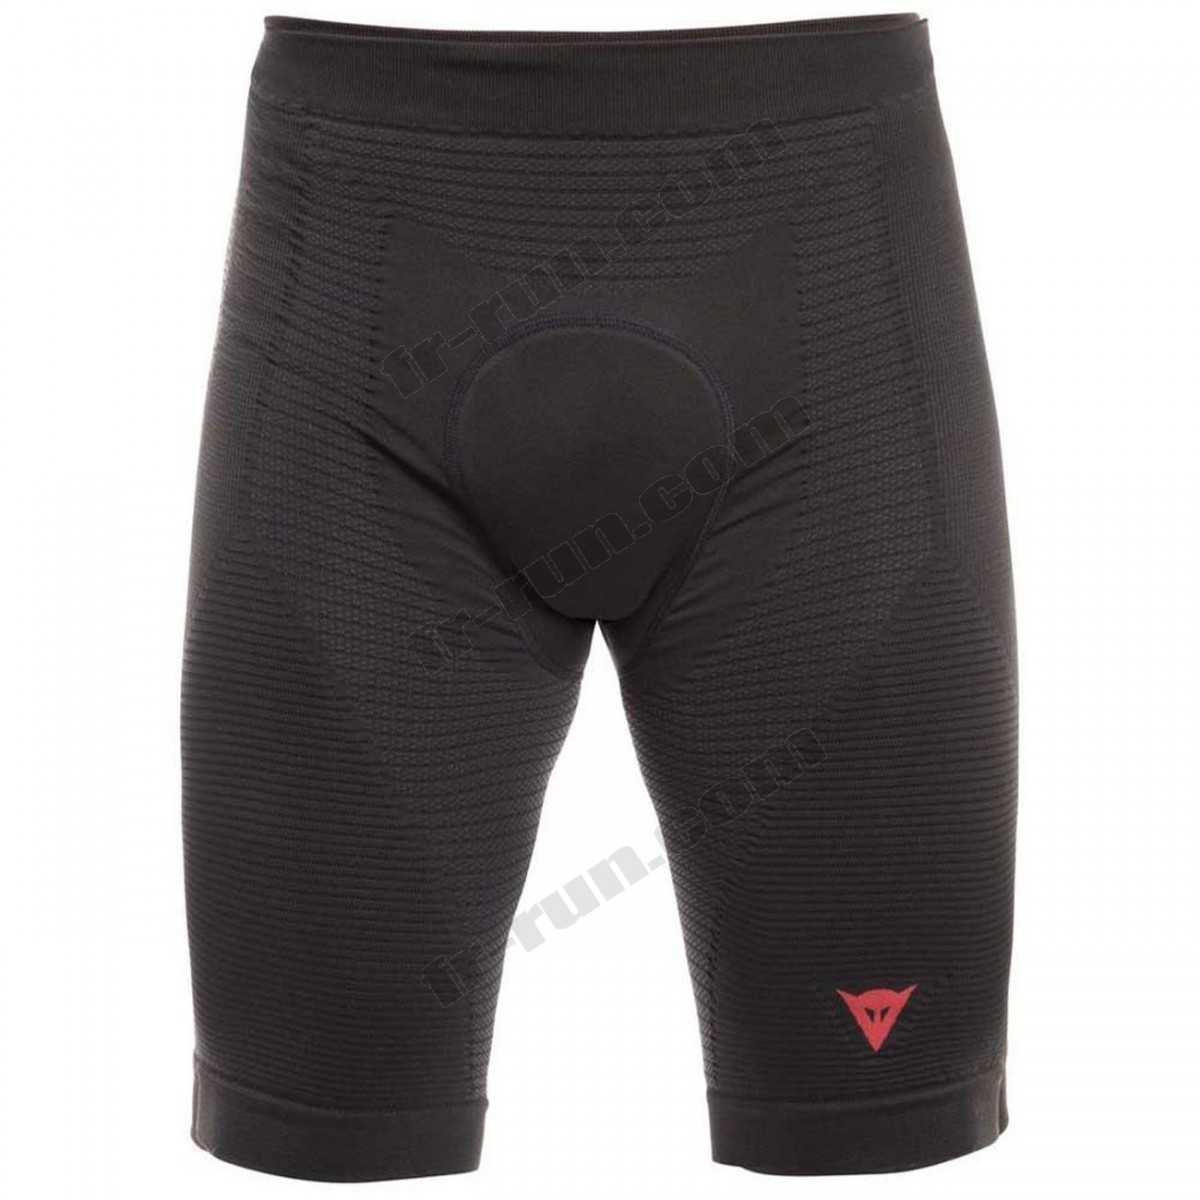 Dainese/Cycle homme DAINESE Dainese Trailknit Undershorts ◇◇◇ Pas Cher Du Tout - -0